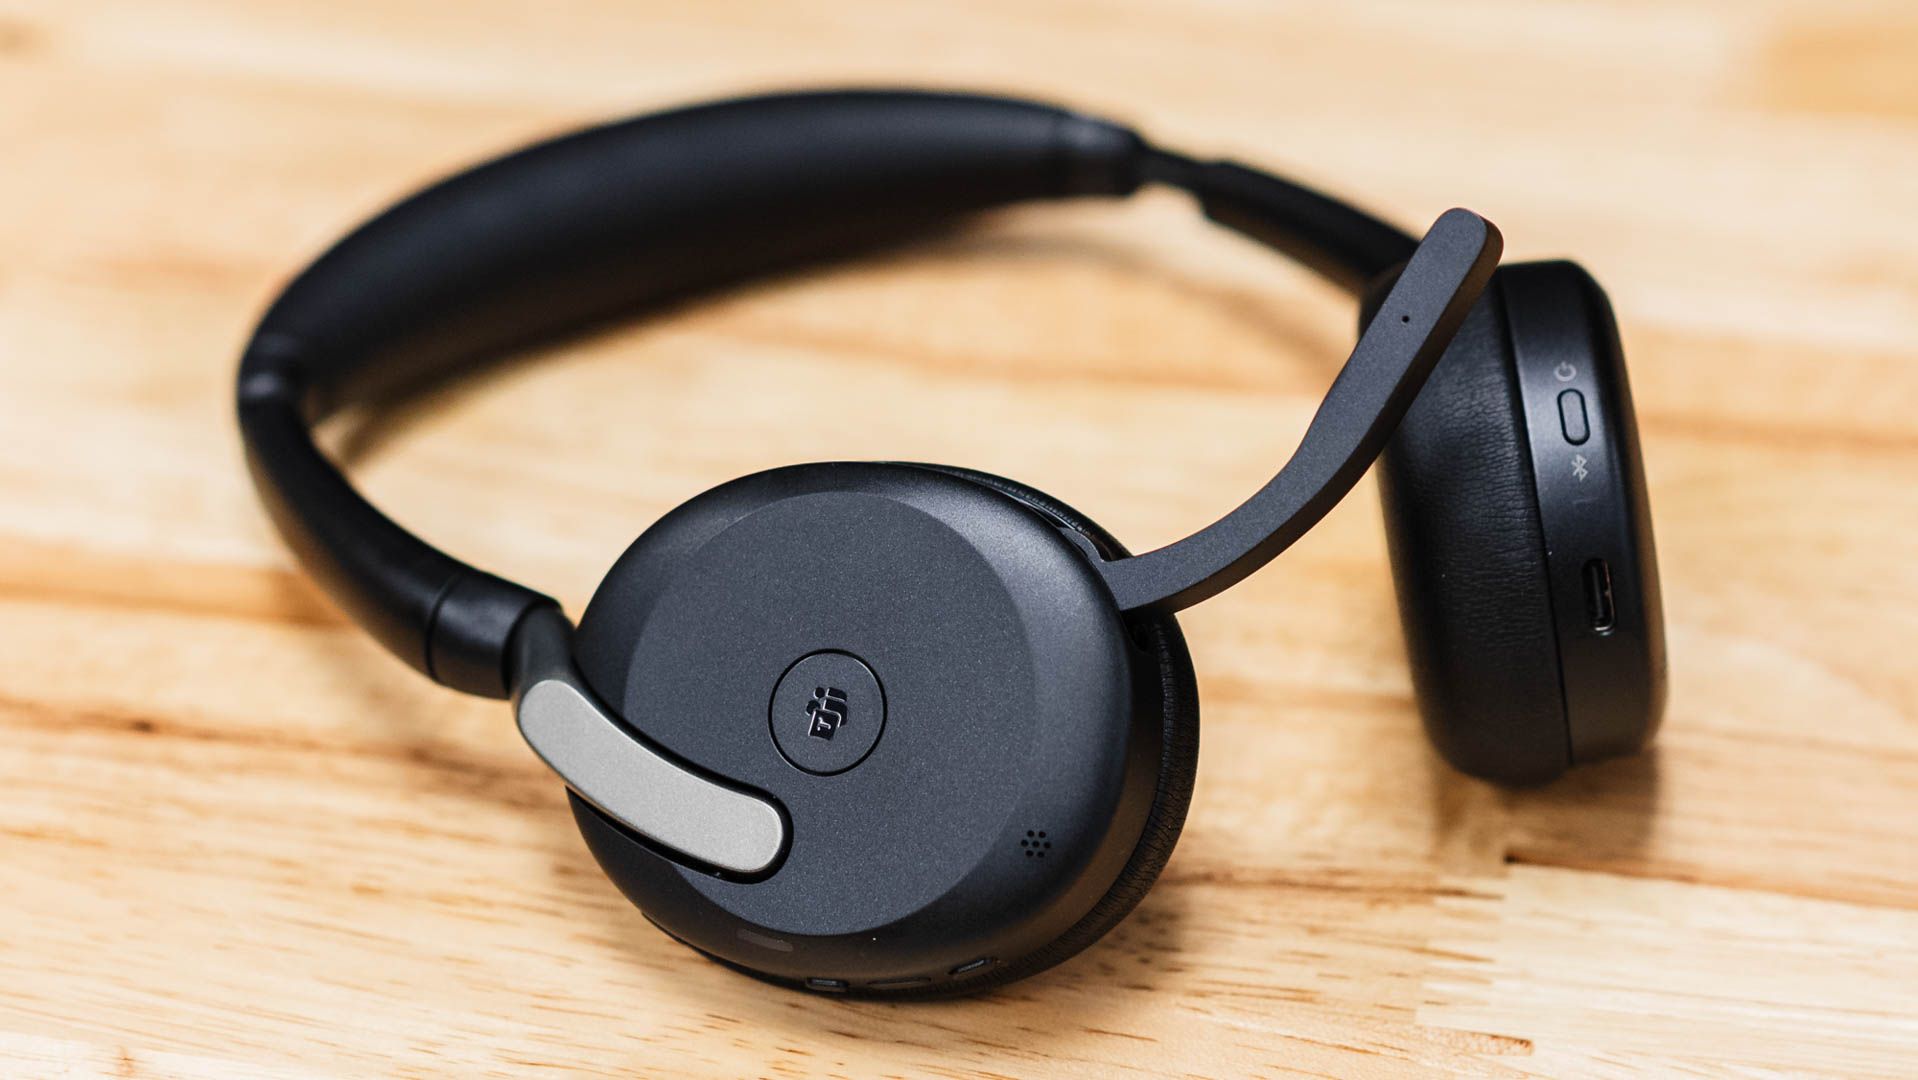 Jabra Evolve2 65 Flex: How to connect to your headset